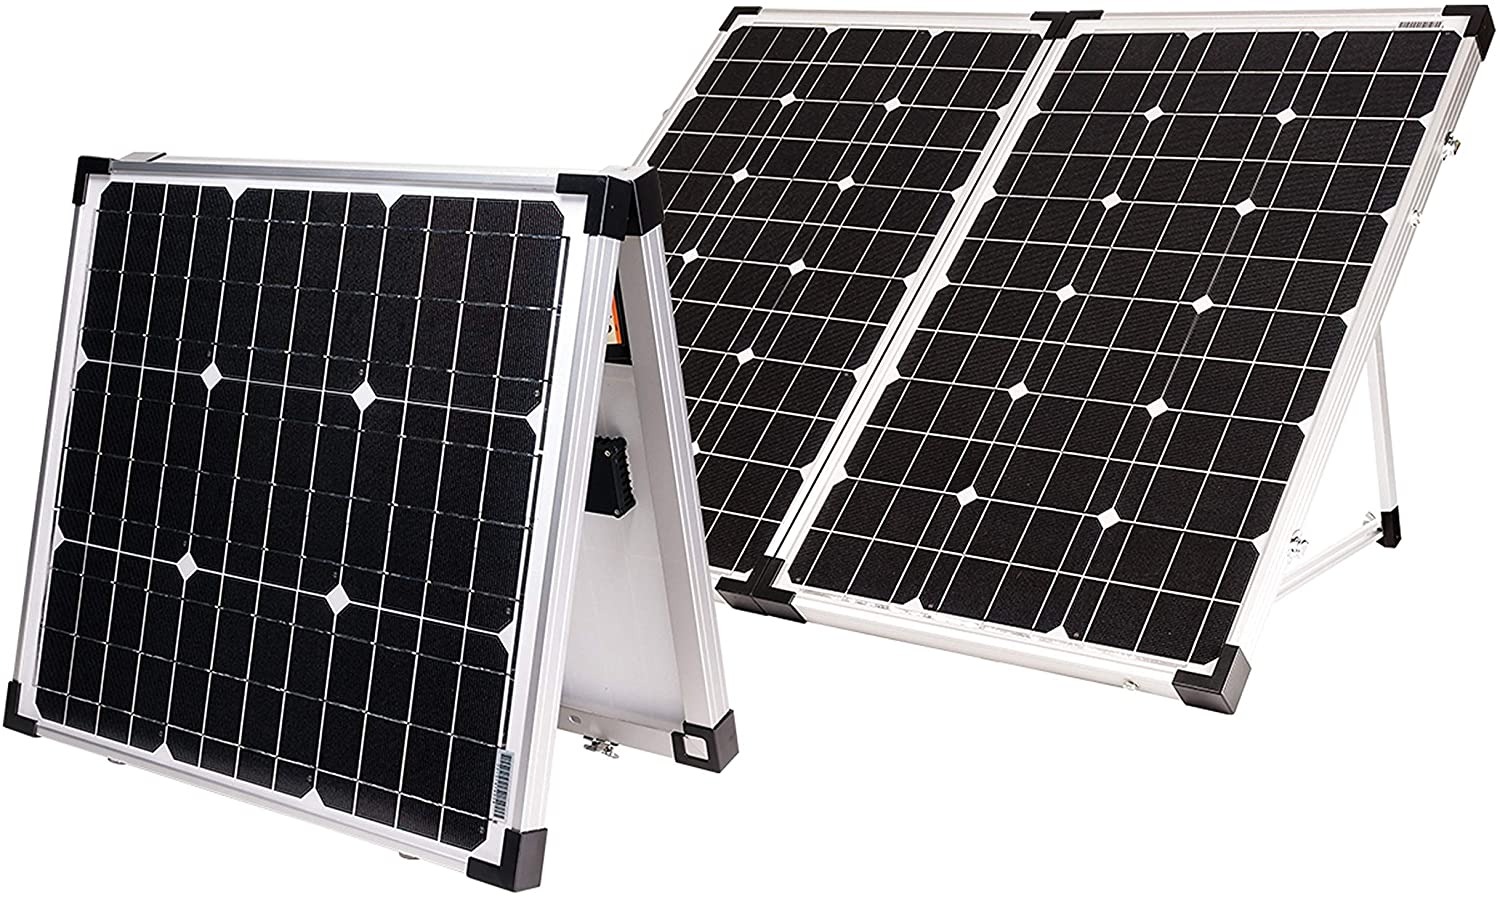 Photo of two Go Power! foldable solar panels on a white background